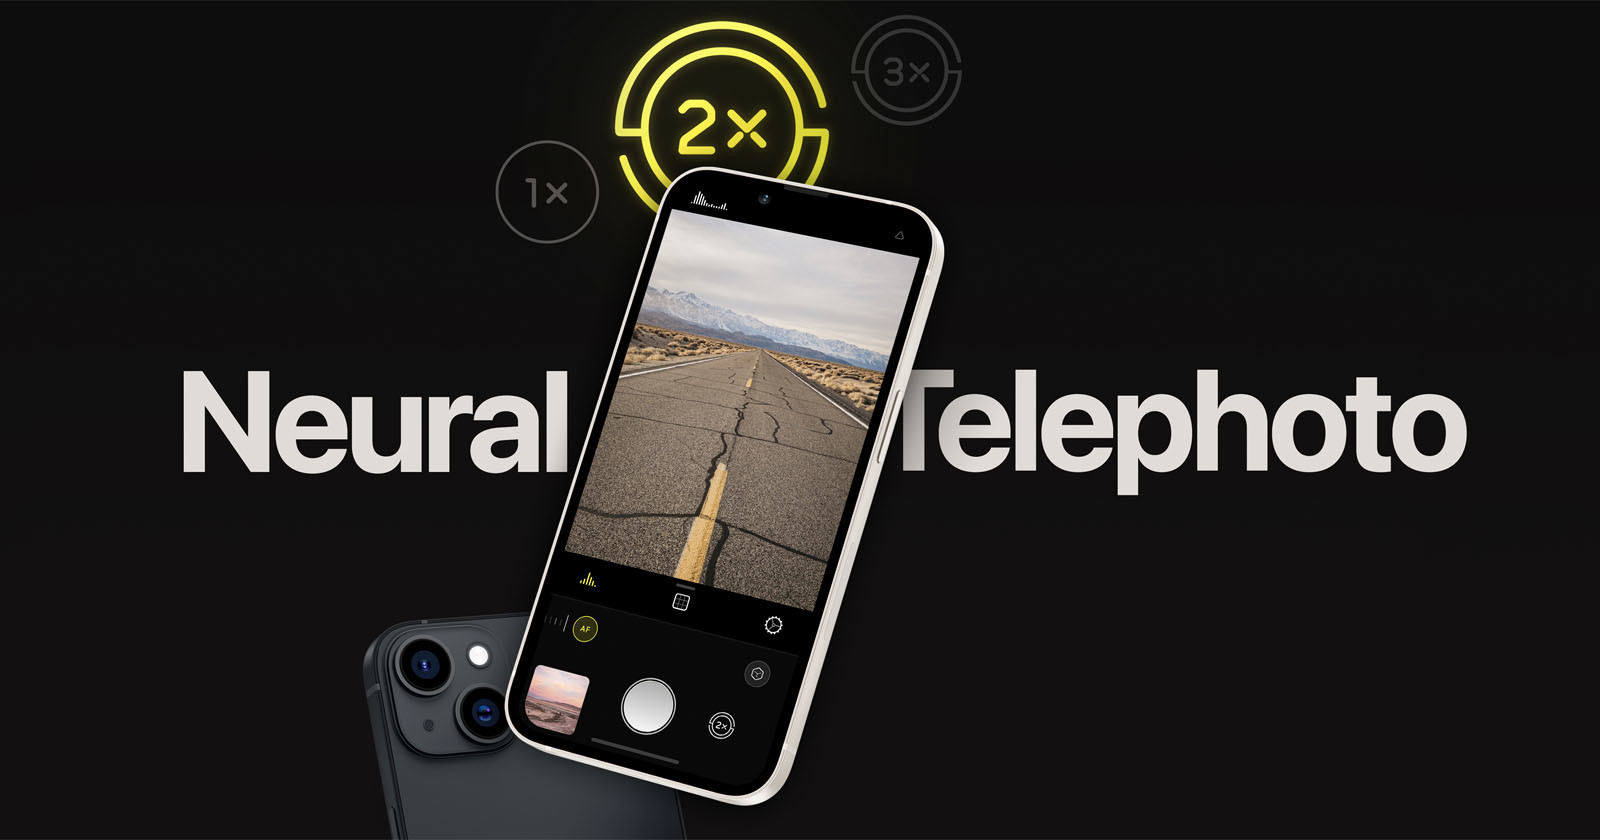  halide neural telephoto feature gives any iphone ai-powered 